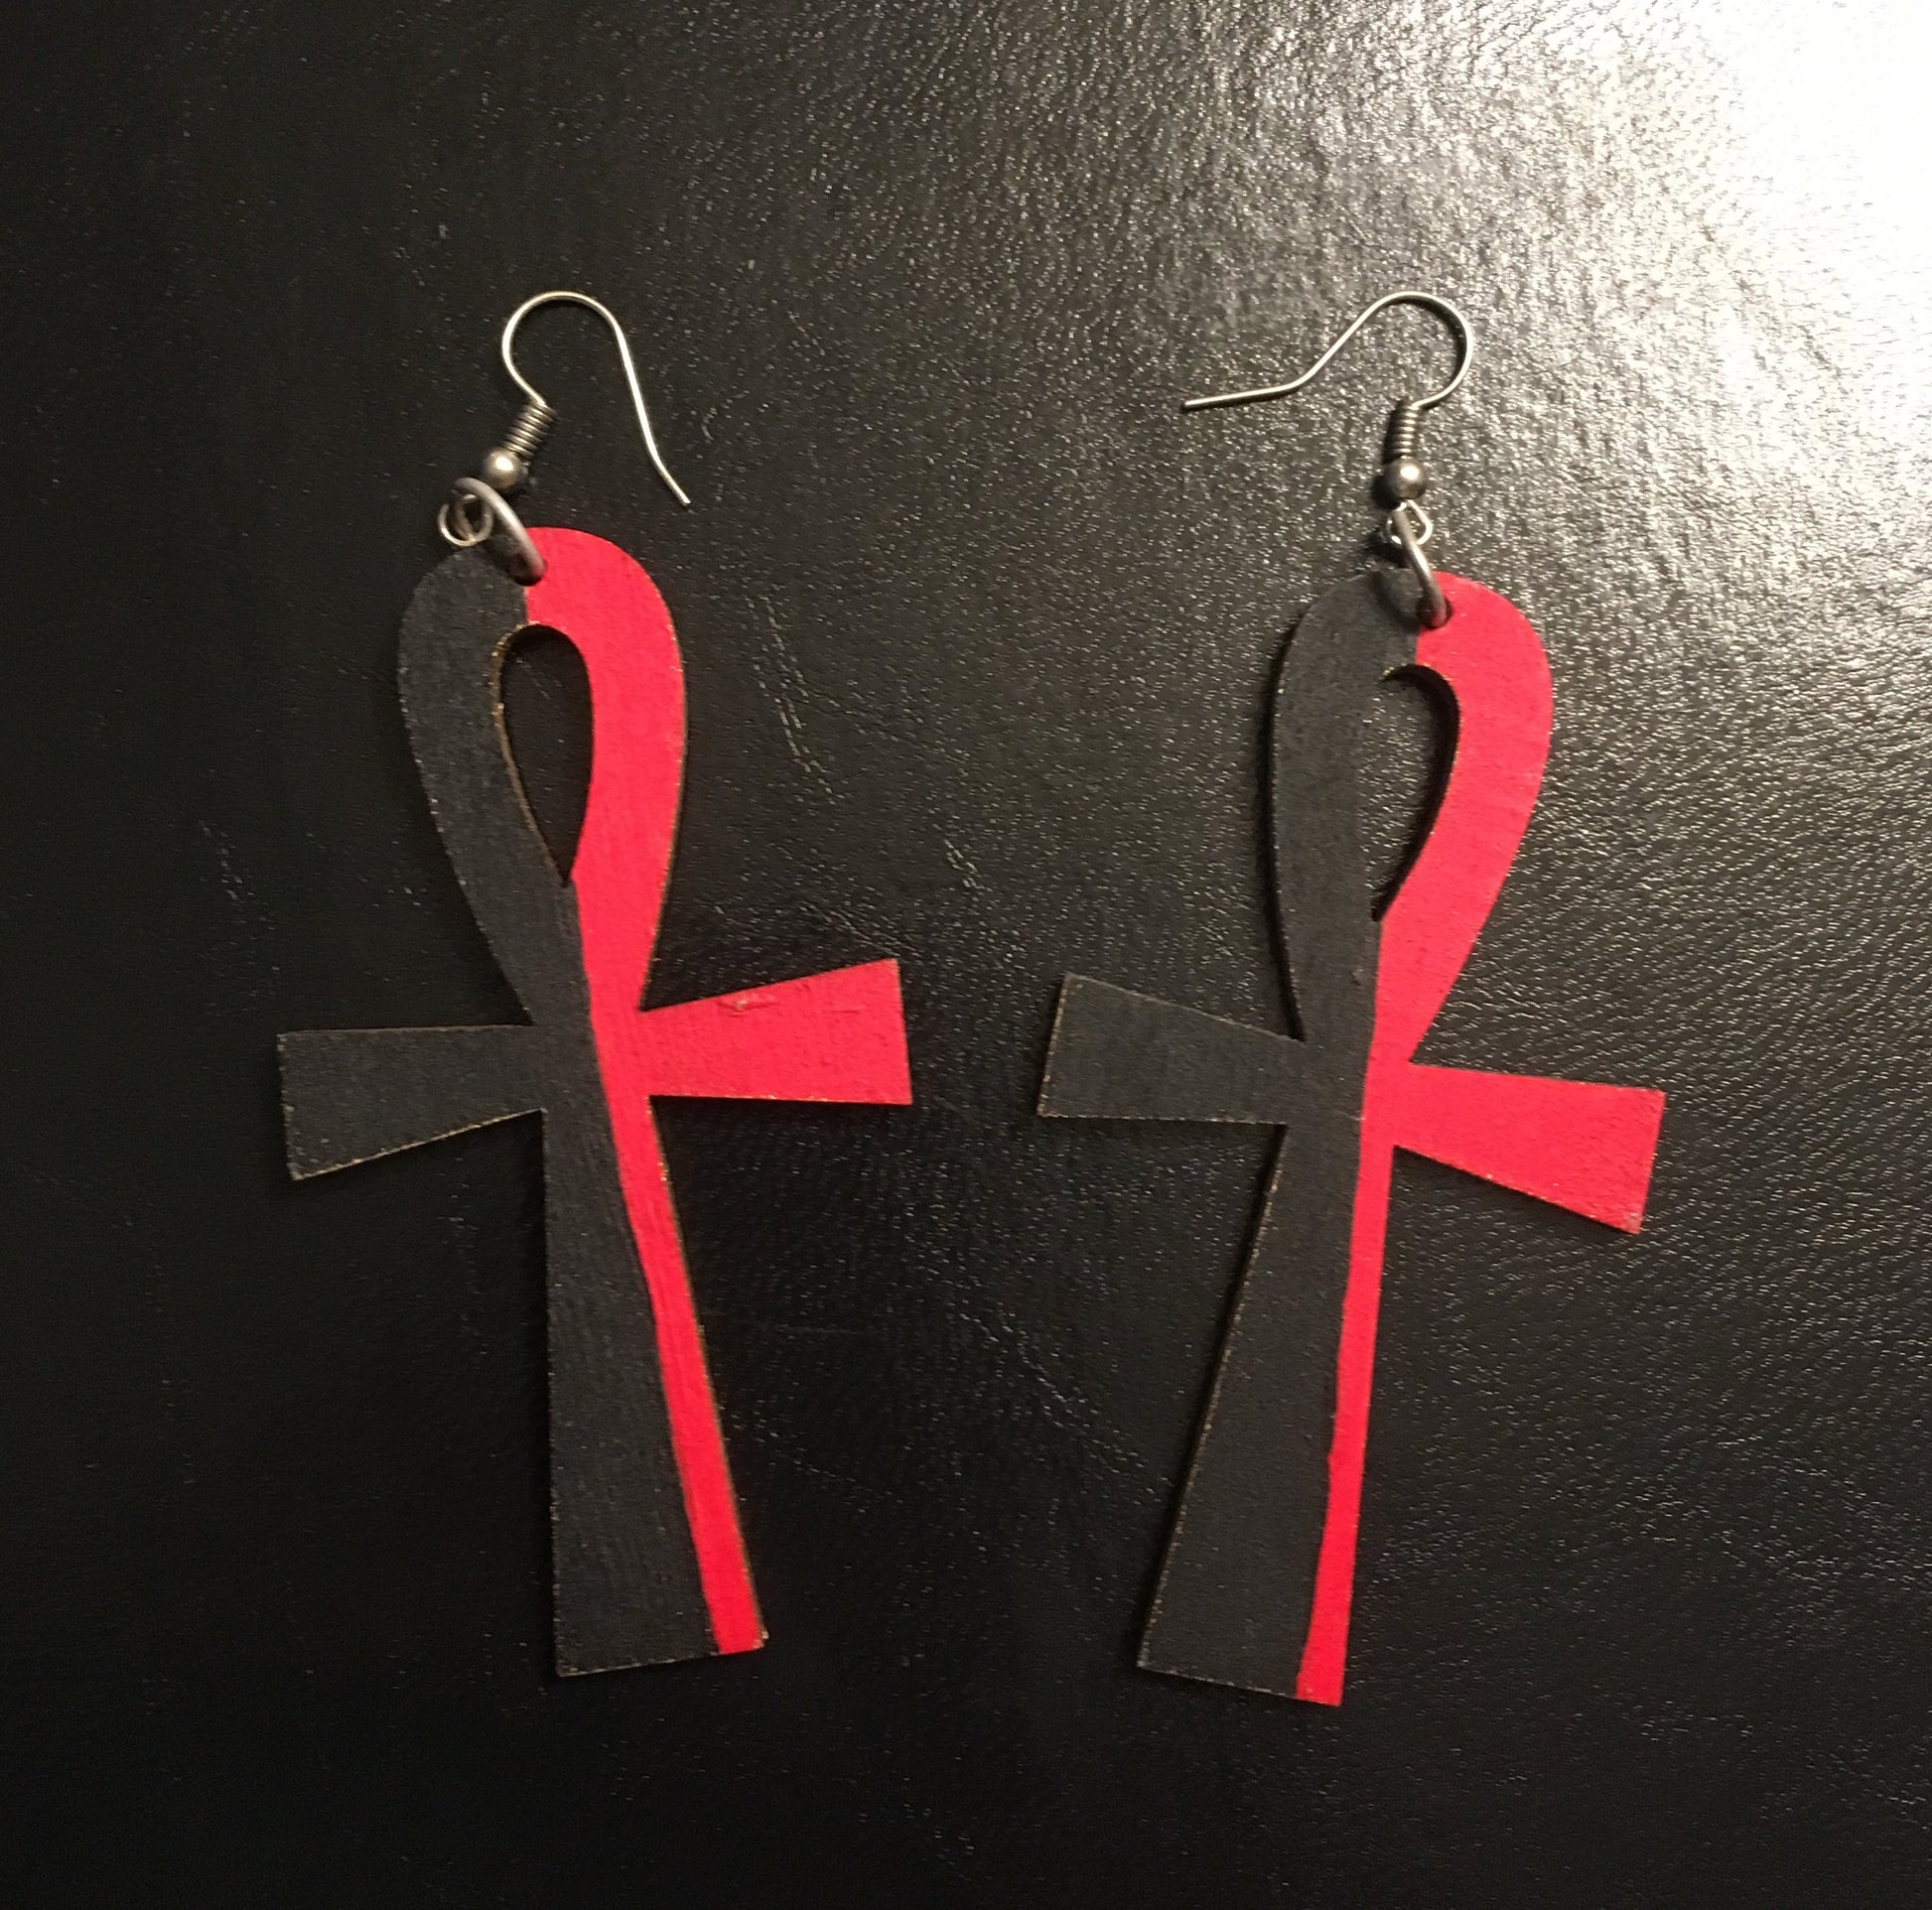 Ankh Art Earrings - Natural Couture